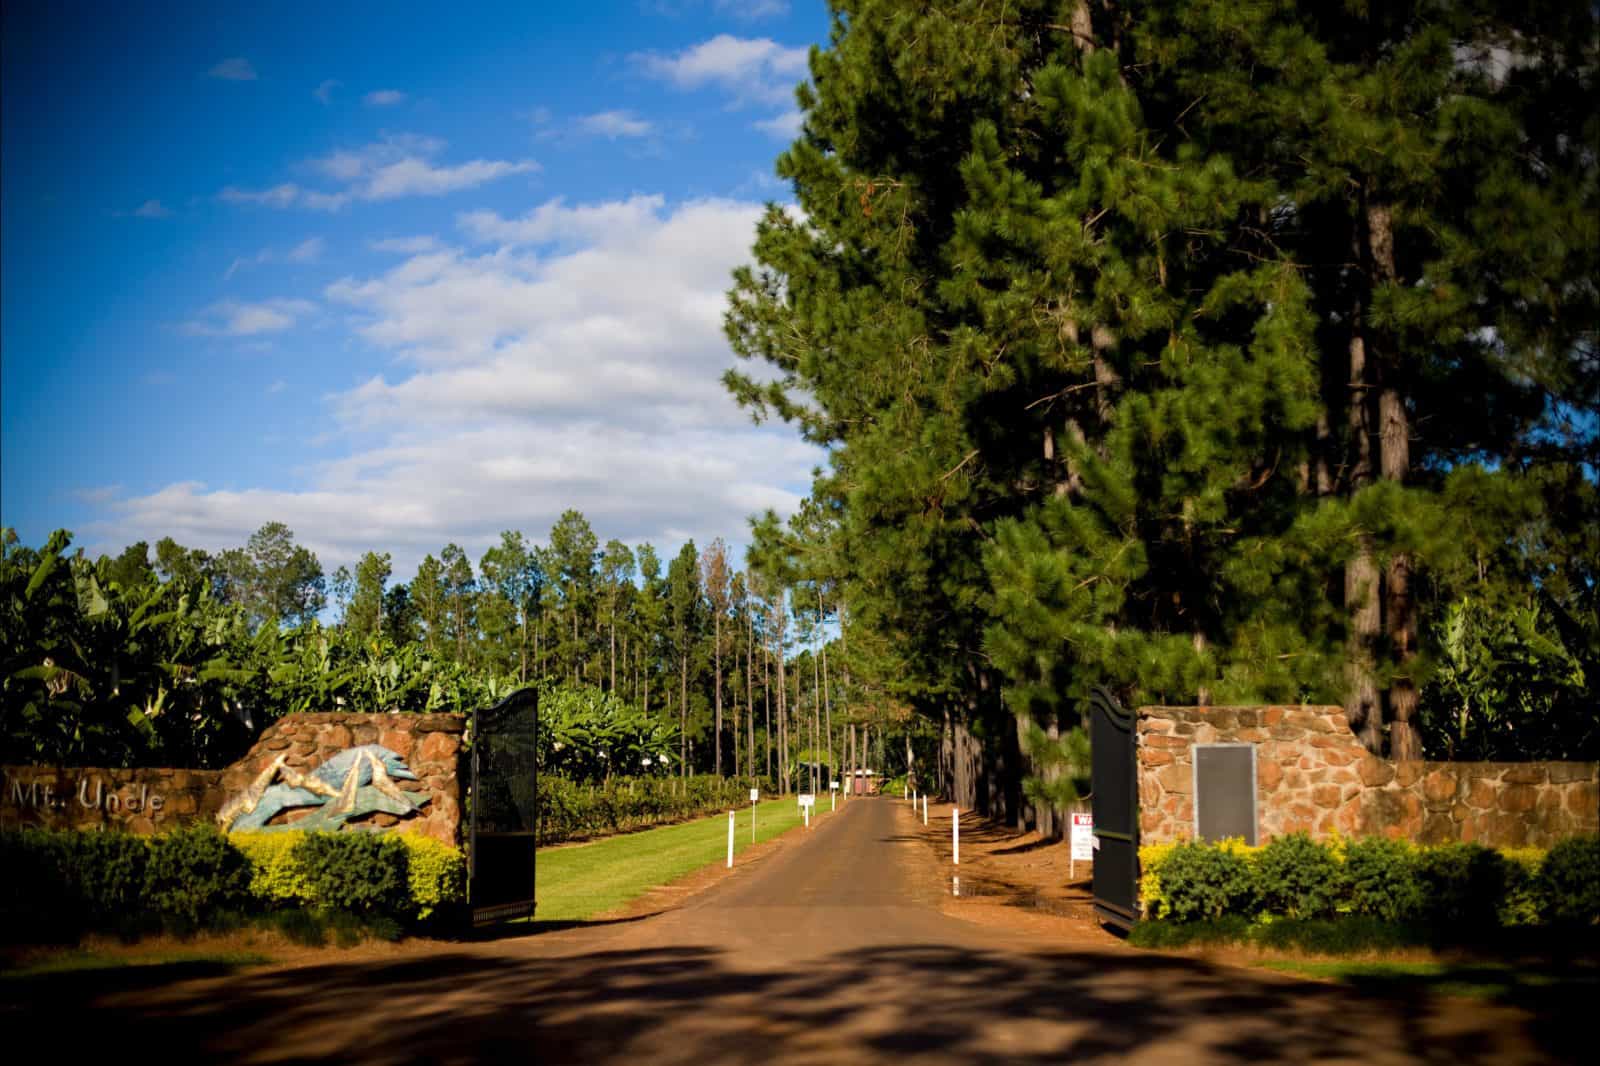 Pine tree lined entrance to Mt Uncle Distillery.